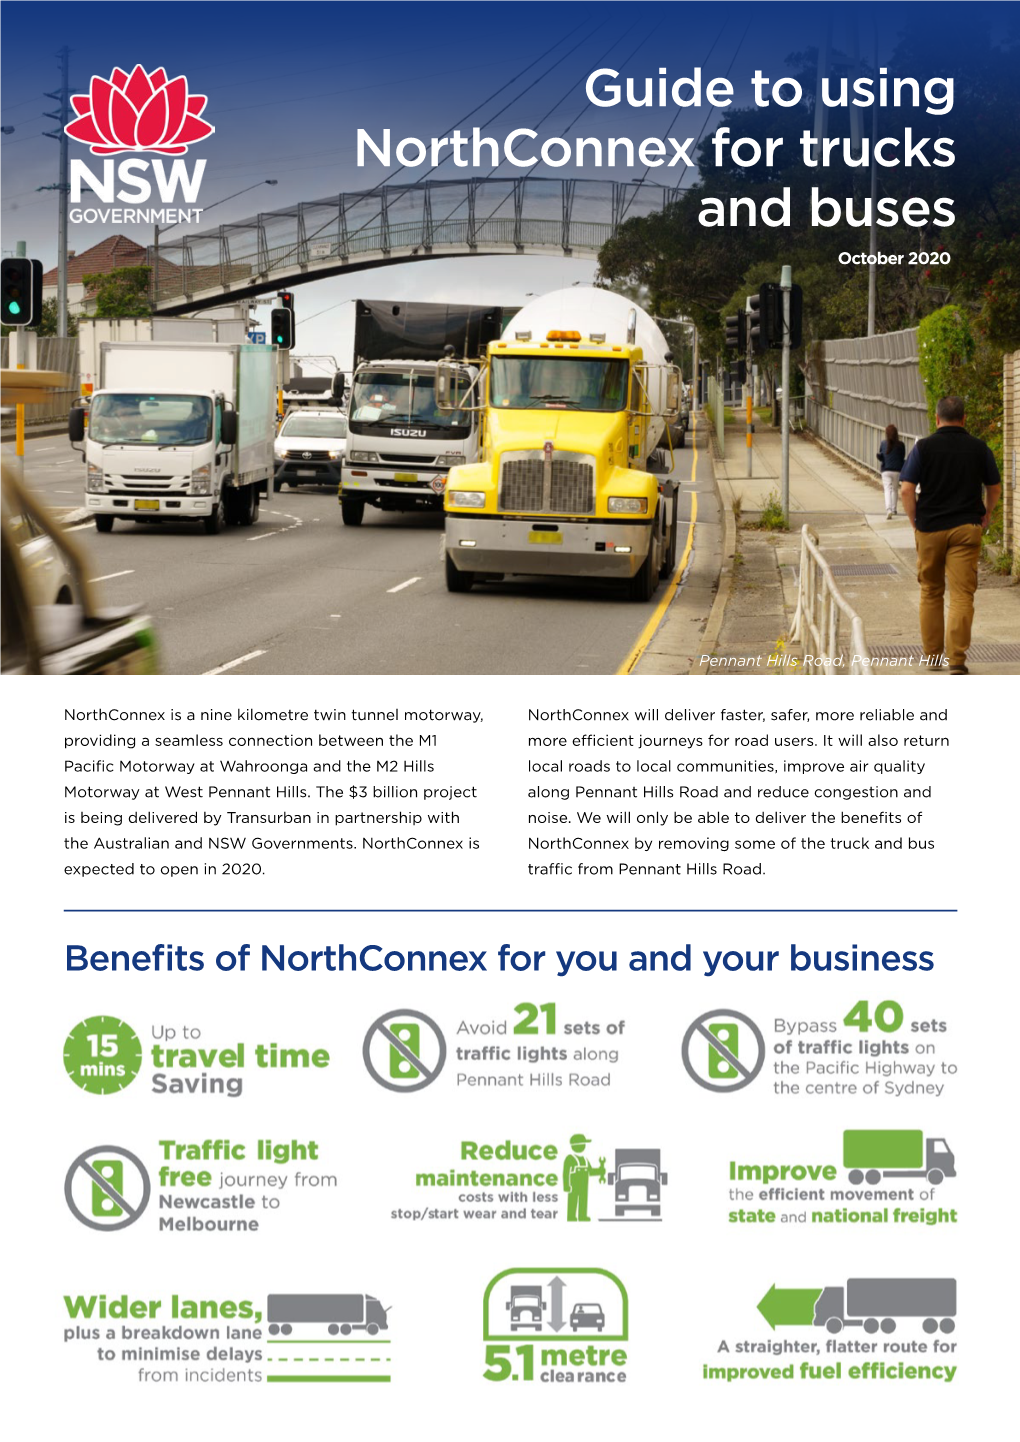 Guide to Using Northconnex for Trucks and Buses October 2020